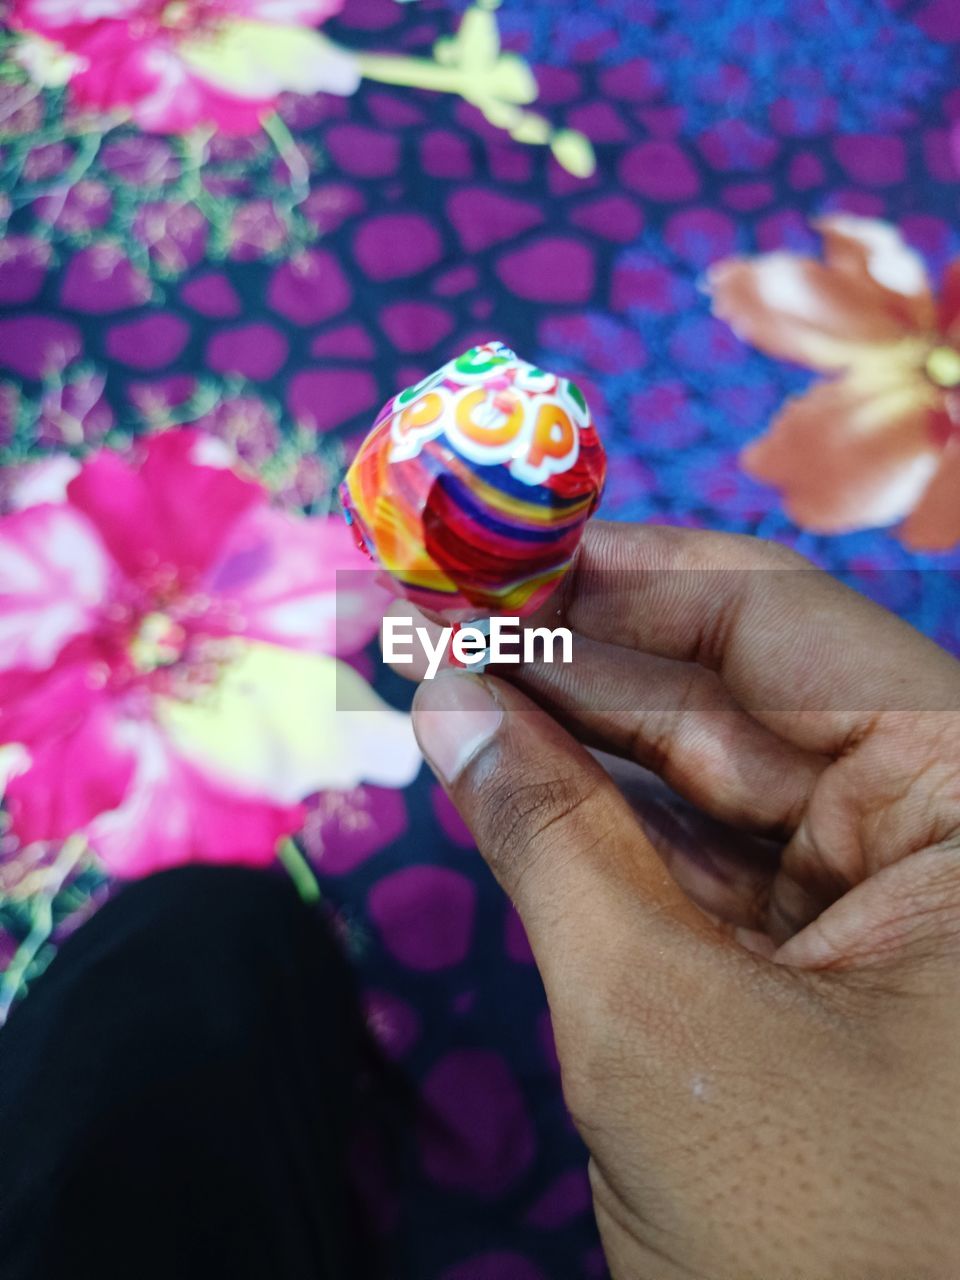 hand, holding, one person, food, flower, pink, sweet, close-up, multi colored, sweet food, freshness, flowering plant, focus on foreground, food and drink, plant, purple, finger, nature, day, personal perspective, yellow, candy, adult, dessert, outdoors, women, celebration, blue, lollipop